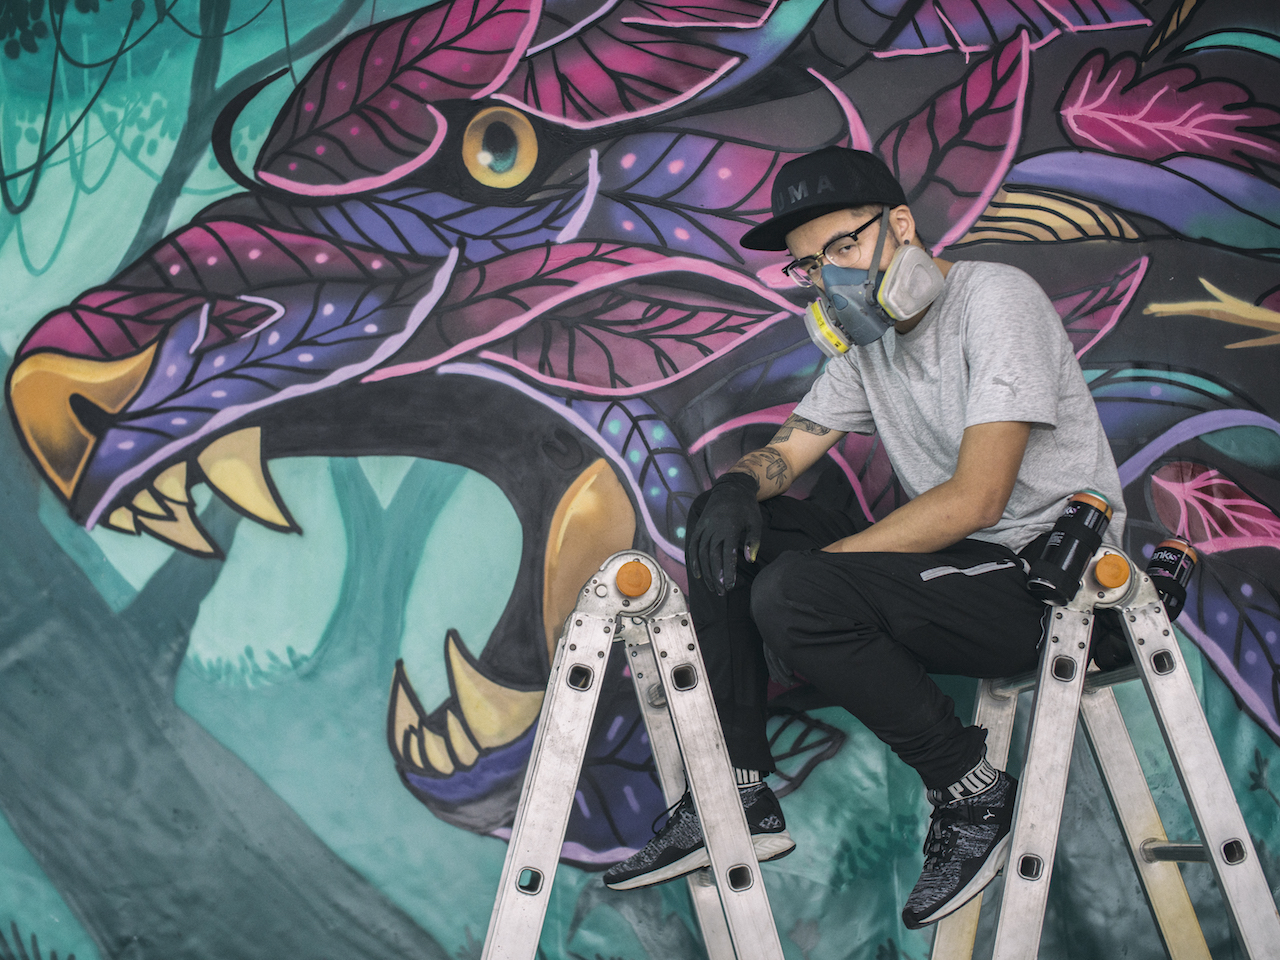 “We don't have to change people's perception of the art. We are here to express what we need to express and people to accept it. I only need one person to accept me and that is enough for me to continue doing what I love.” - Kenji Chai, graffiti artist